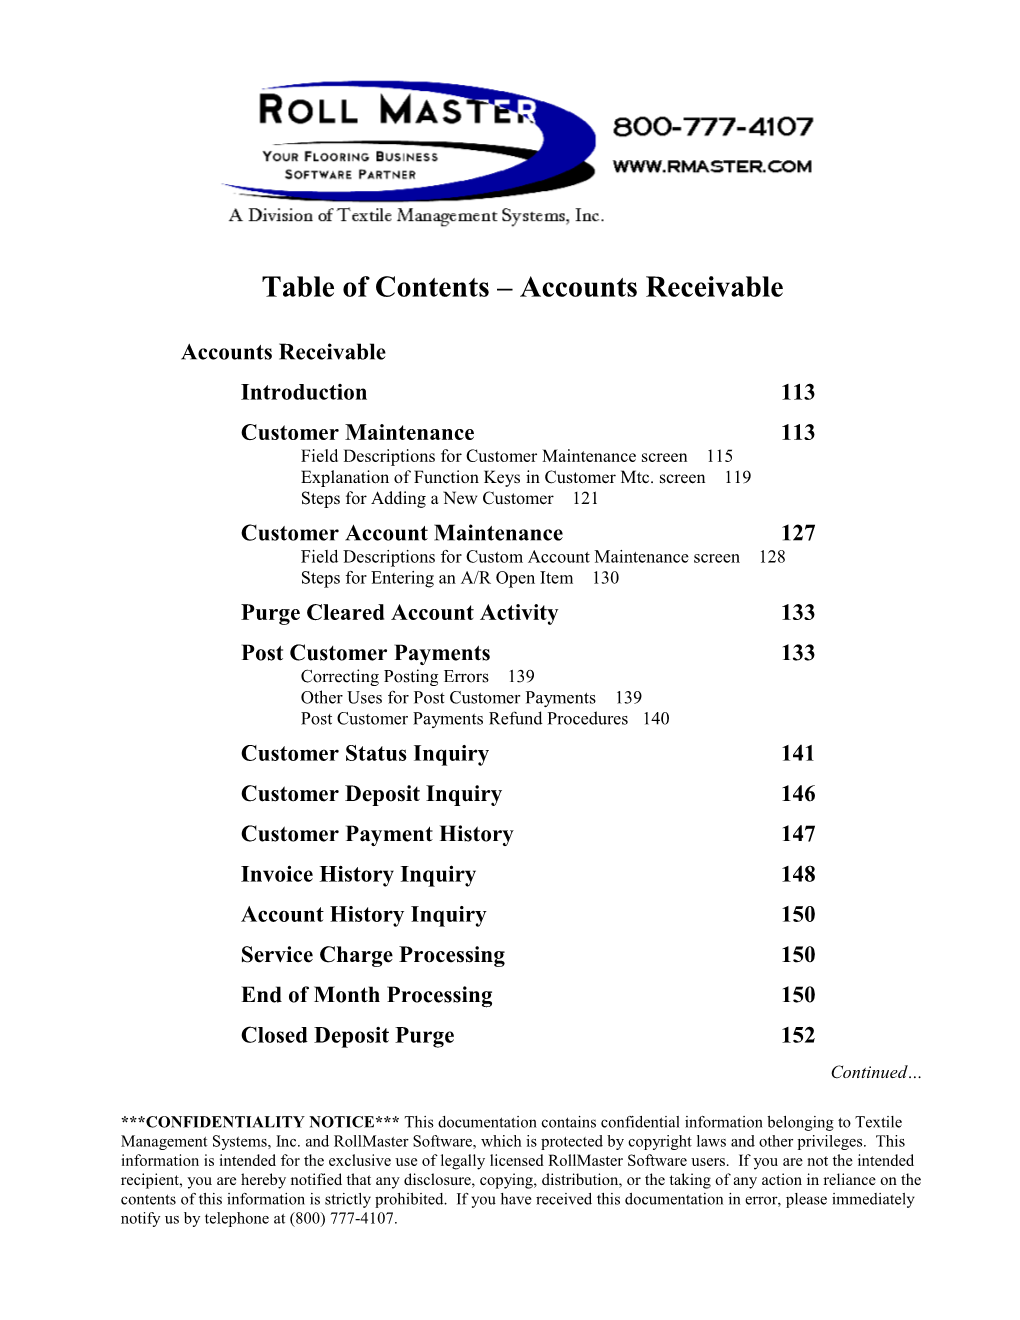 Table of Contents Accounts Receivable